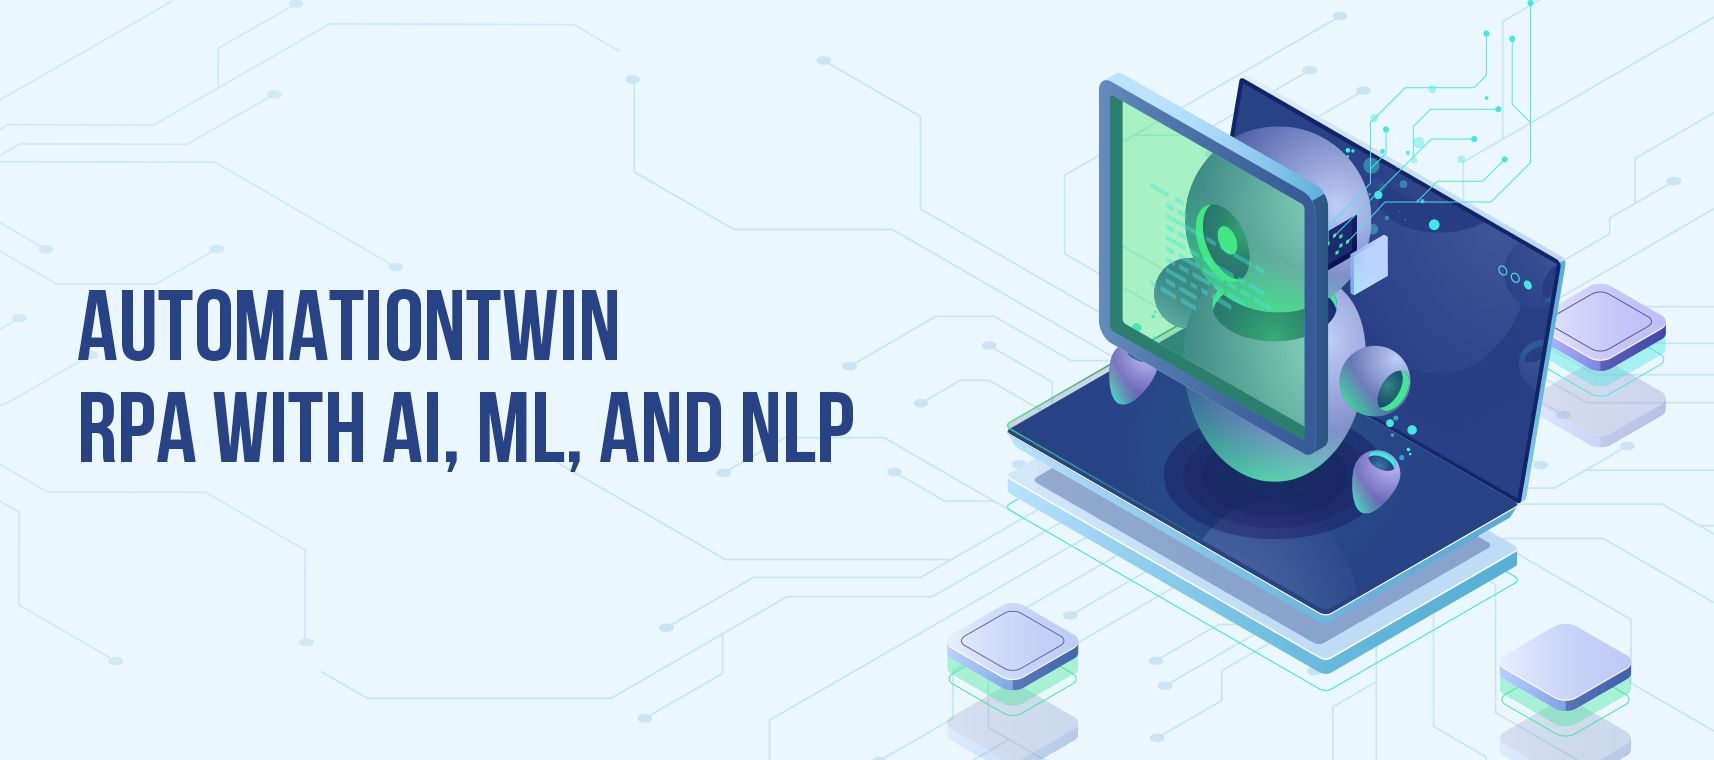 Combining AutomationTwin RPA with AI, ML and NLP - TFTus